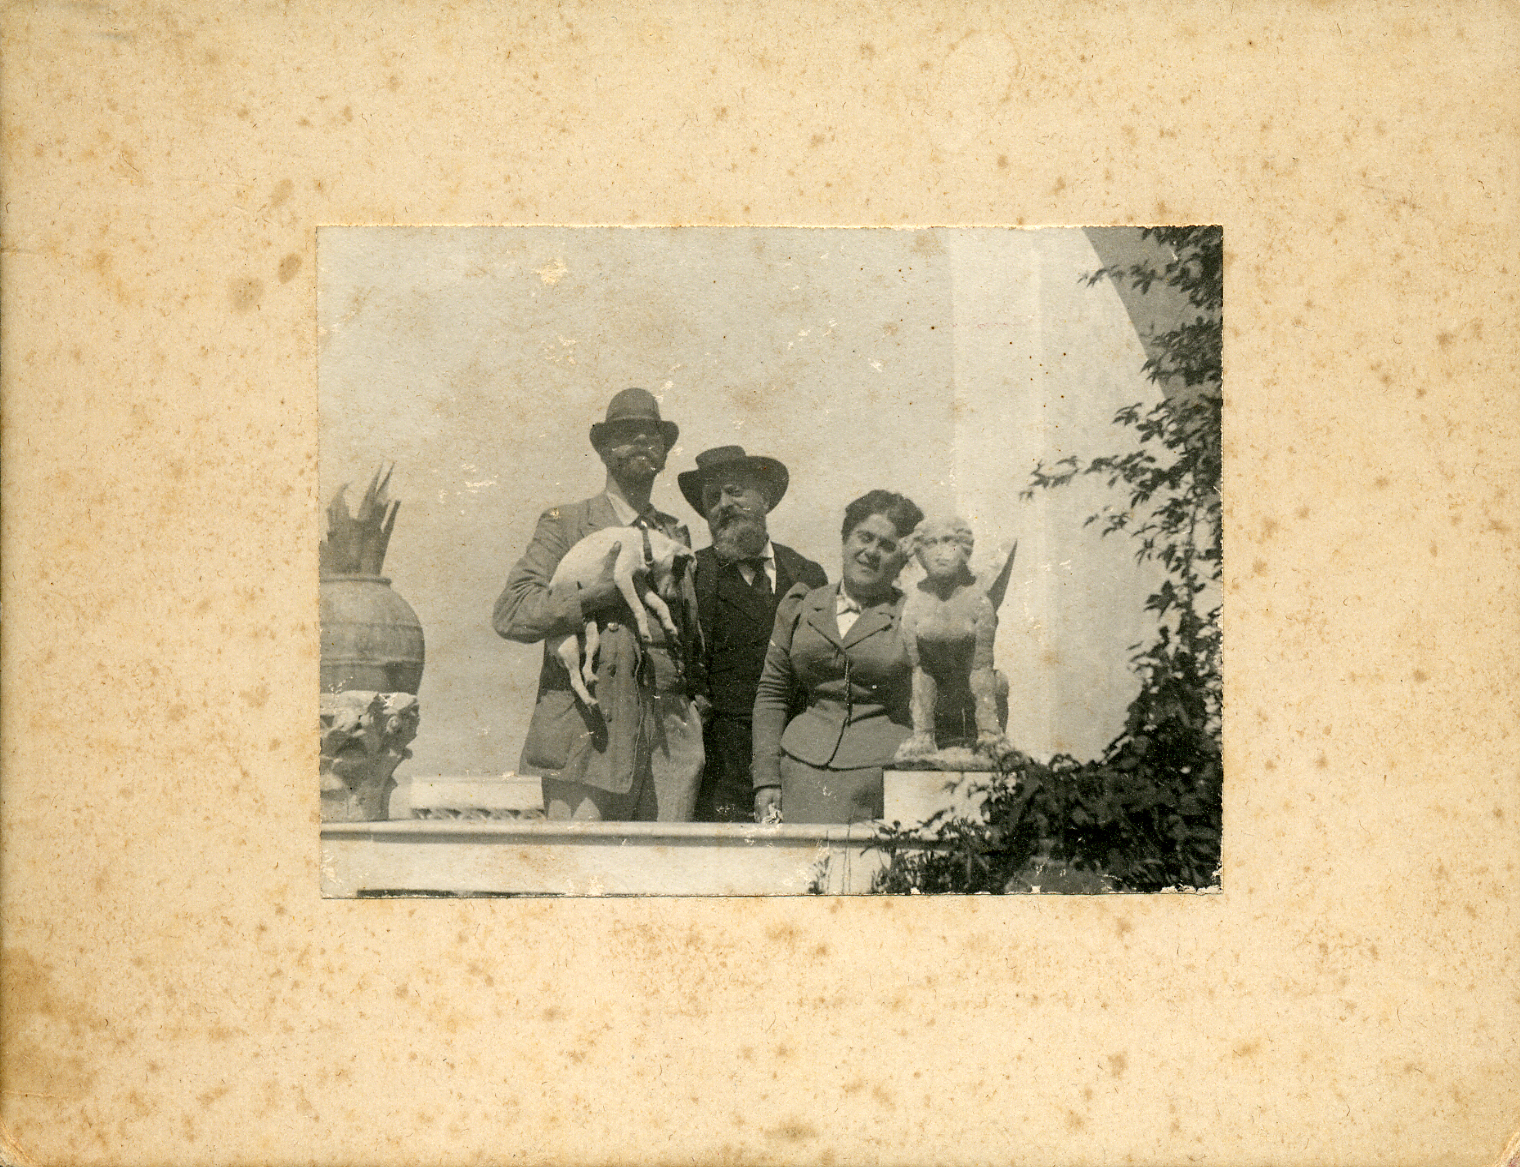 A smiling Axel Munthe with his dog, the art collector Giuseppe Primoli and the author Matilde Serao at Villa San Michele